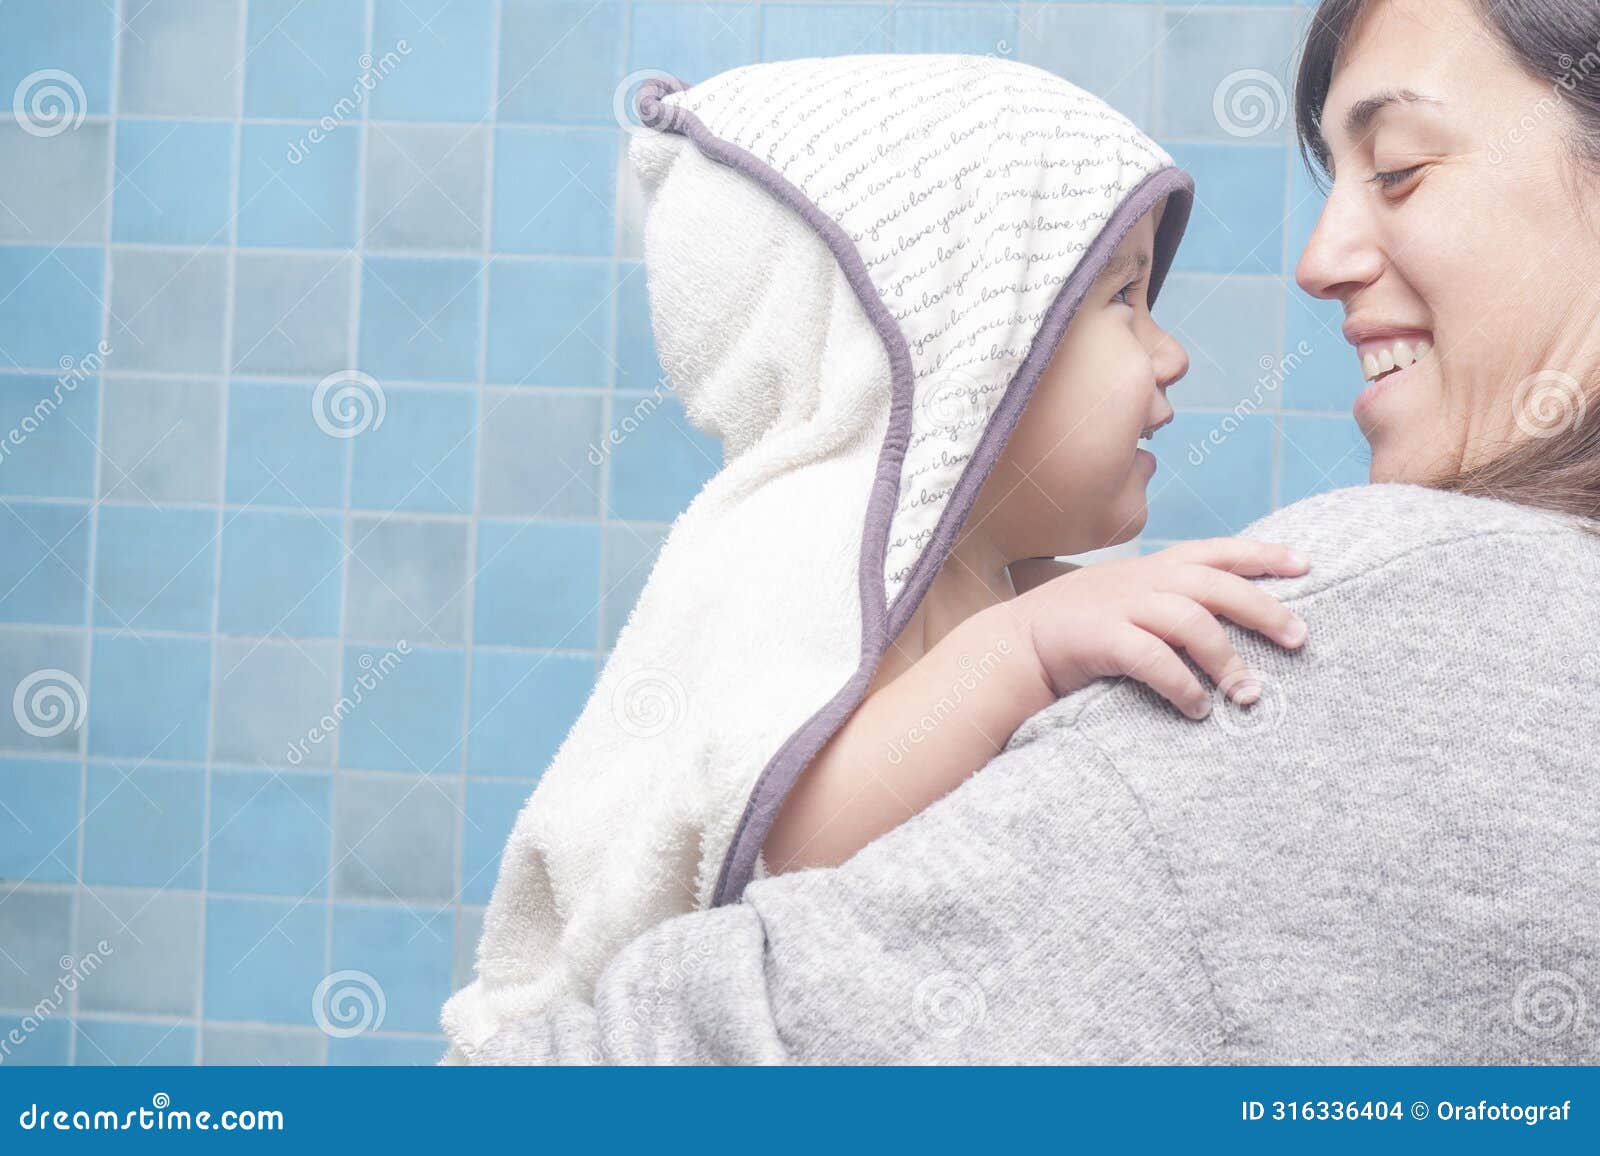 smiling mother and son look at each other with great complicity as the mother towels her son dry